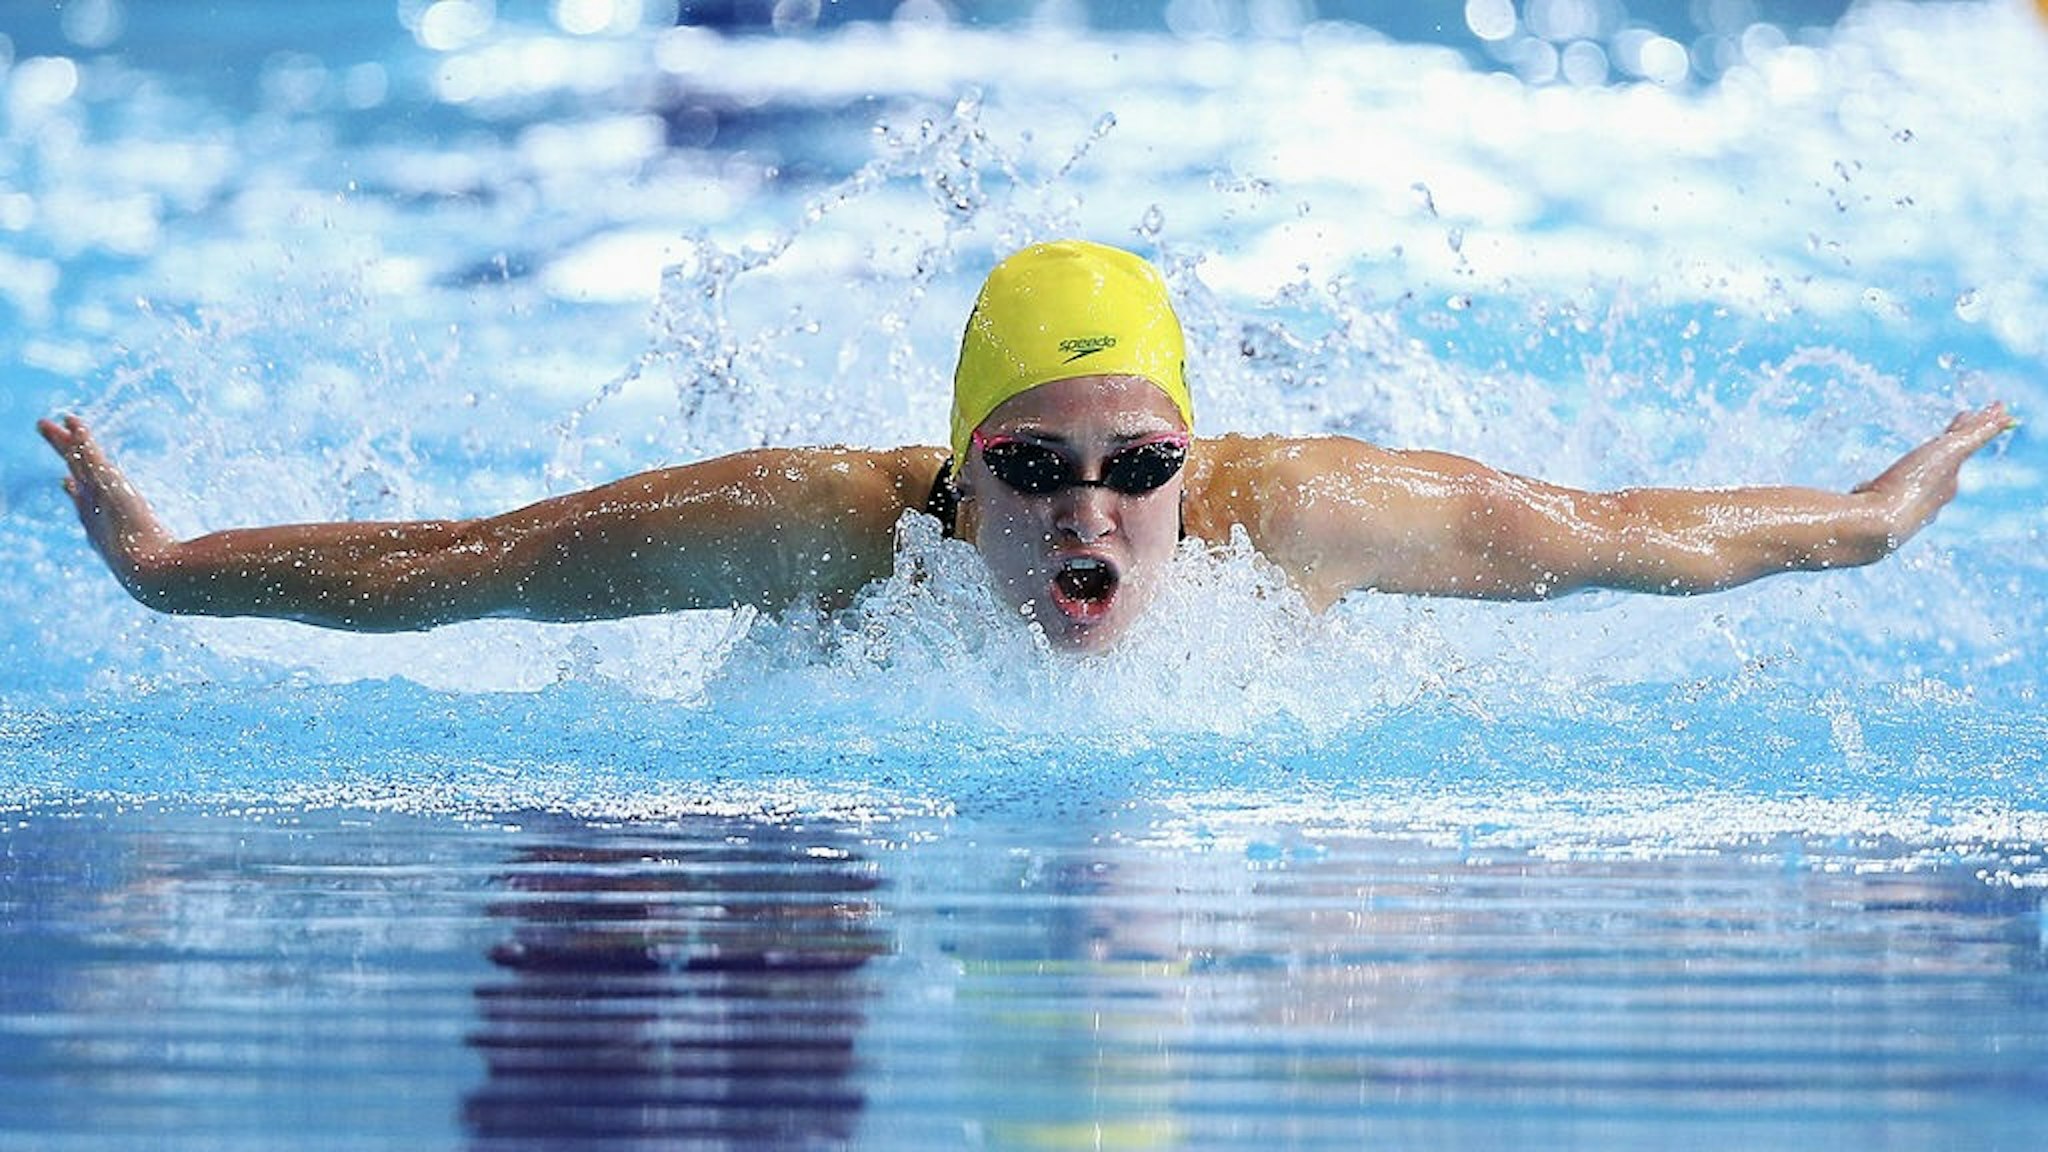 20th Commonwealth Games - Day 3: Swimming GLASGOW, SCOTLAND - JULY 26: Maddie Groves of Australia competes in the Women's 50m Butterfly Heat 5 at Tollcross International Swimming Centre during day three of the Glasgow 2014 Commonwealth Games on July 26, 2014 in Glasgow, Scotland. (Photo by Quinn Rooney/Getty Images) Quinn Rooney / Staff via Getty Images